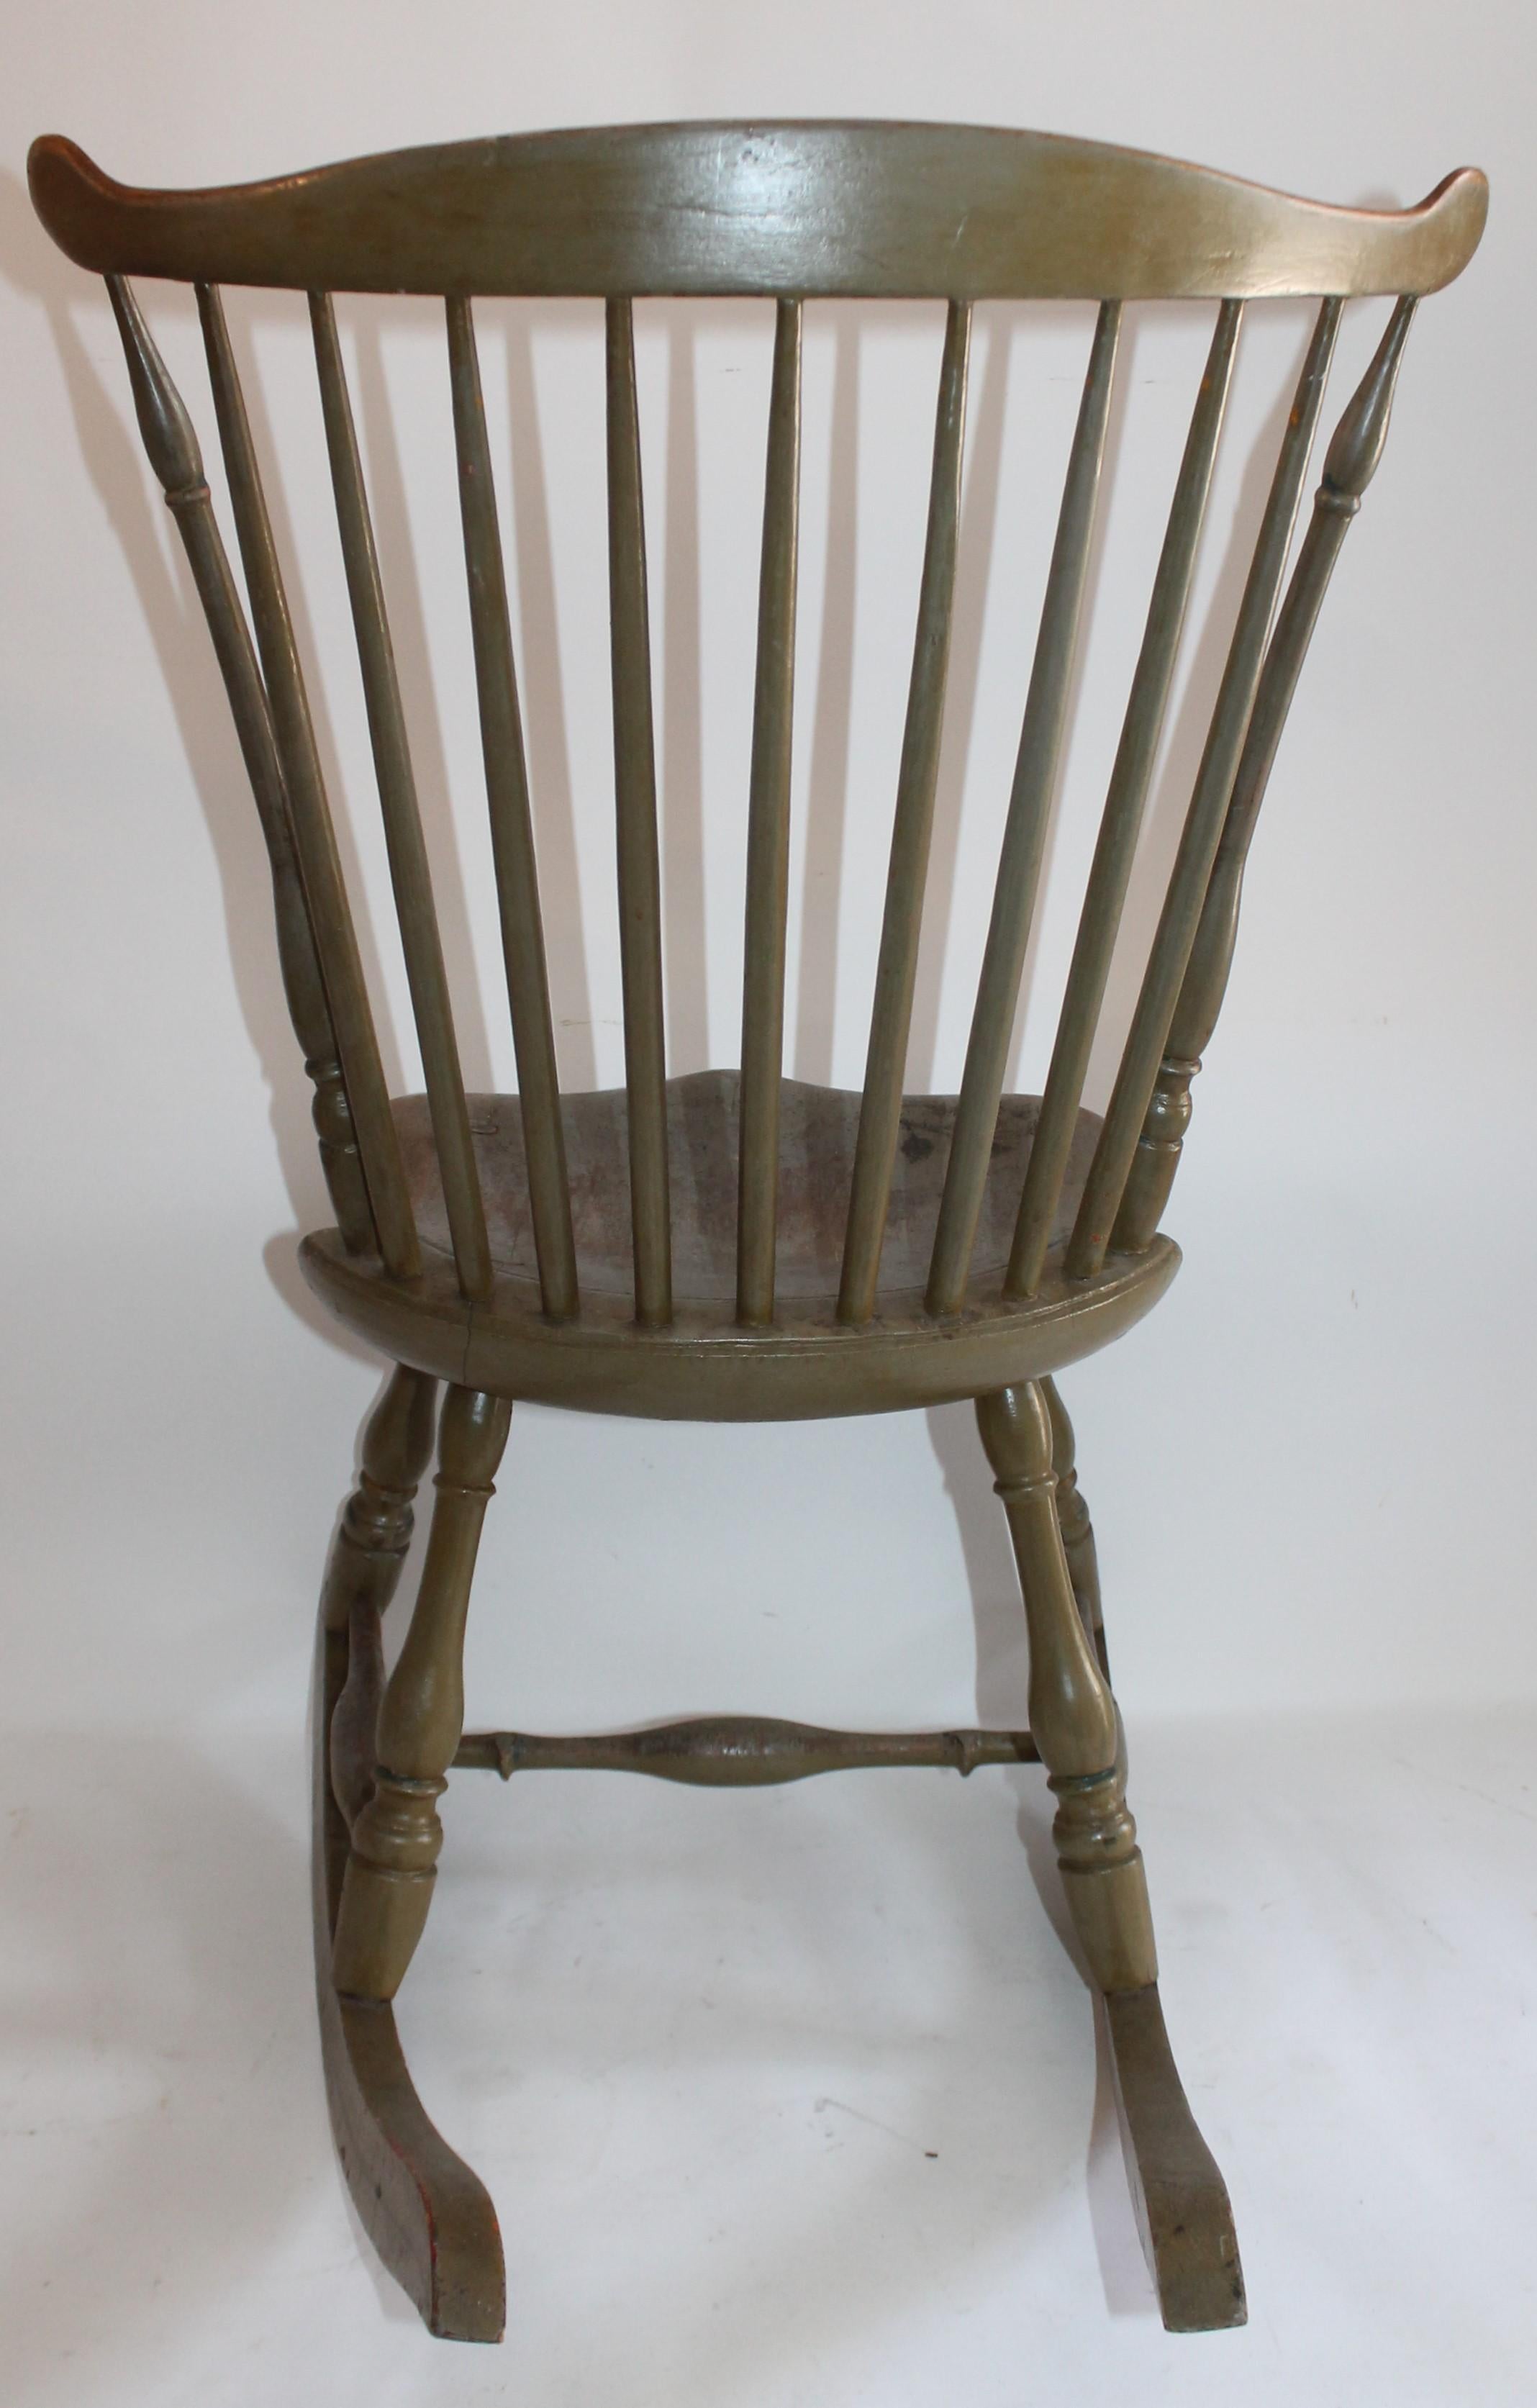 Hand-Painted 19th Century Original Painted Sage Green Windsor Rocking Chair For Sale